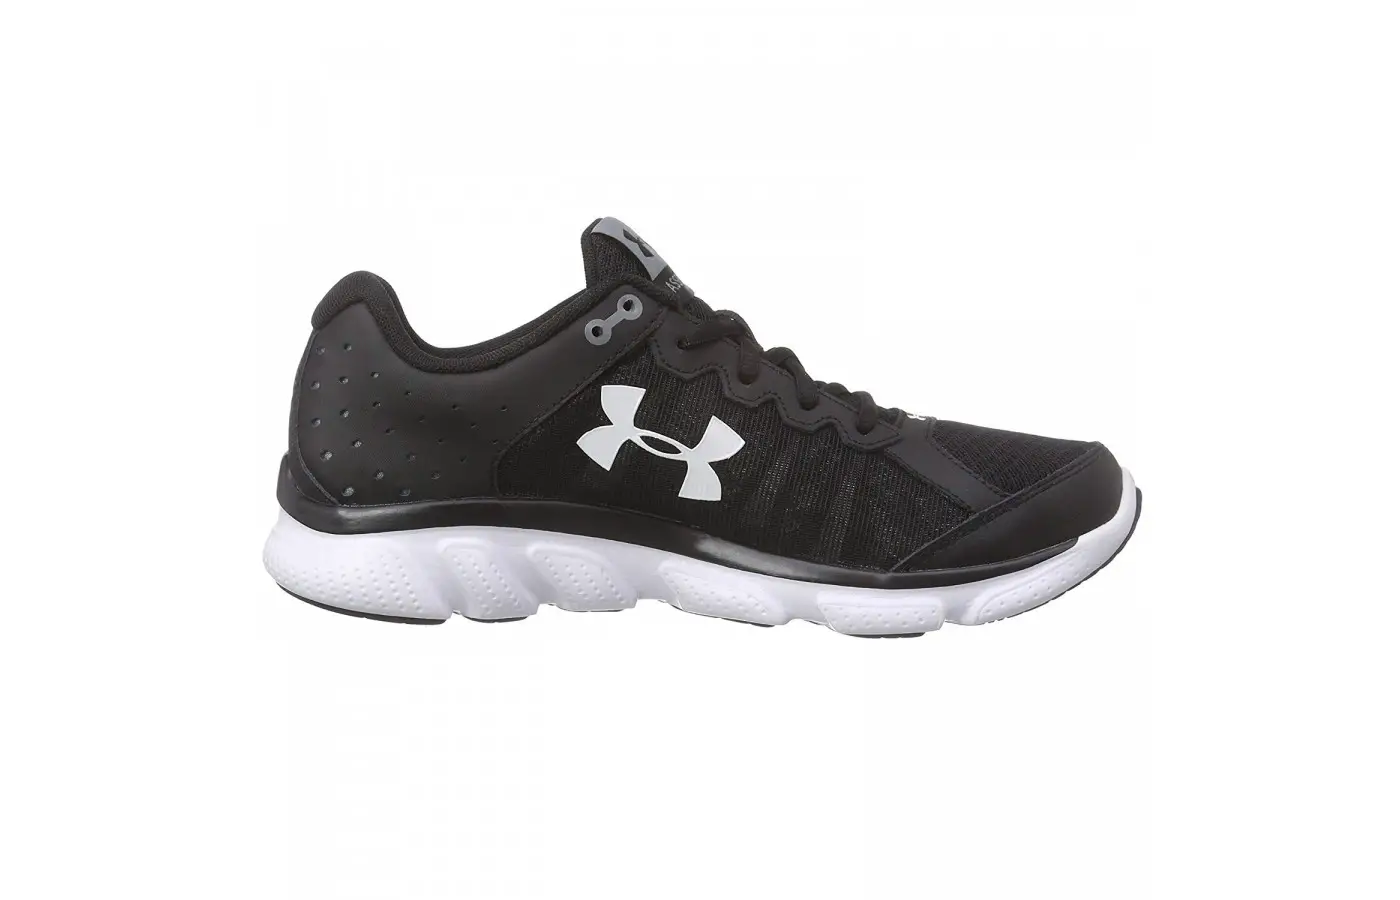 The Under Armour Micro G Assert 6 offers a stylish design to offer versatility.